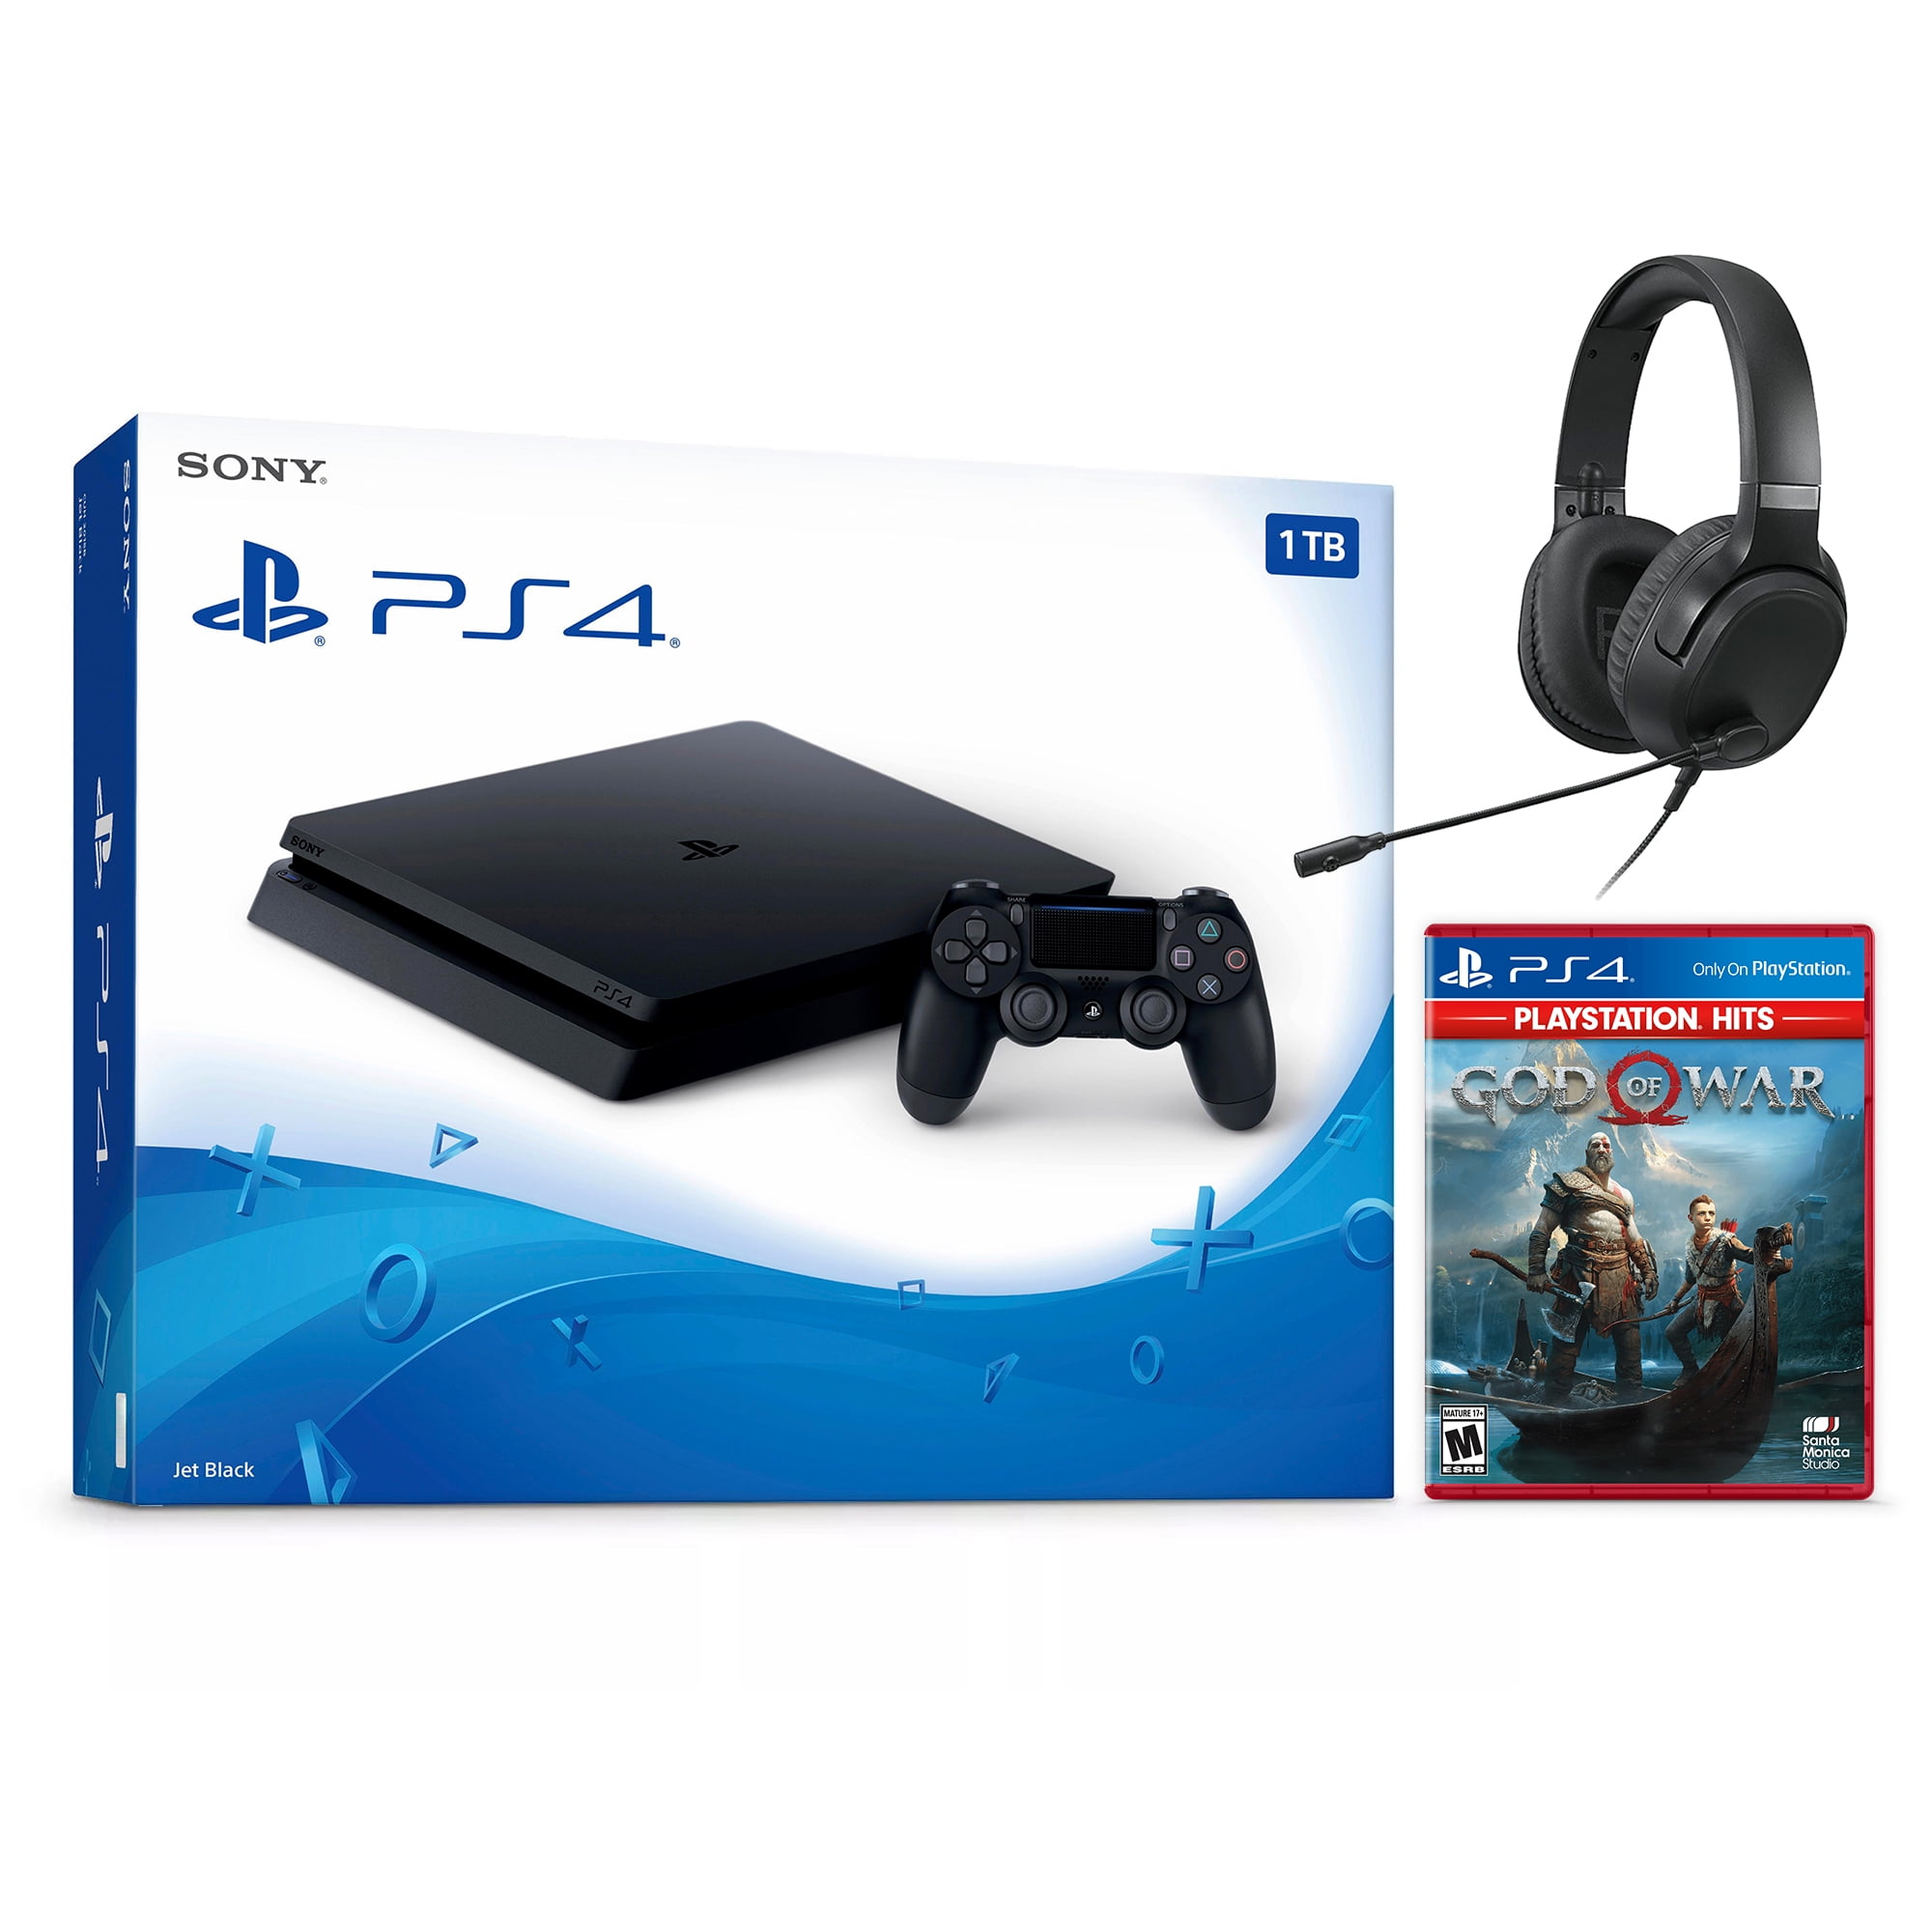 PS4 Games Playstation 4 BUY ONE OR Assorted BUNDLE - MINT - FREE